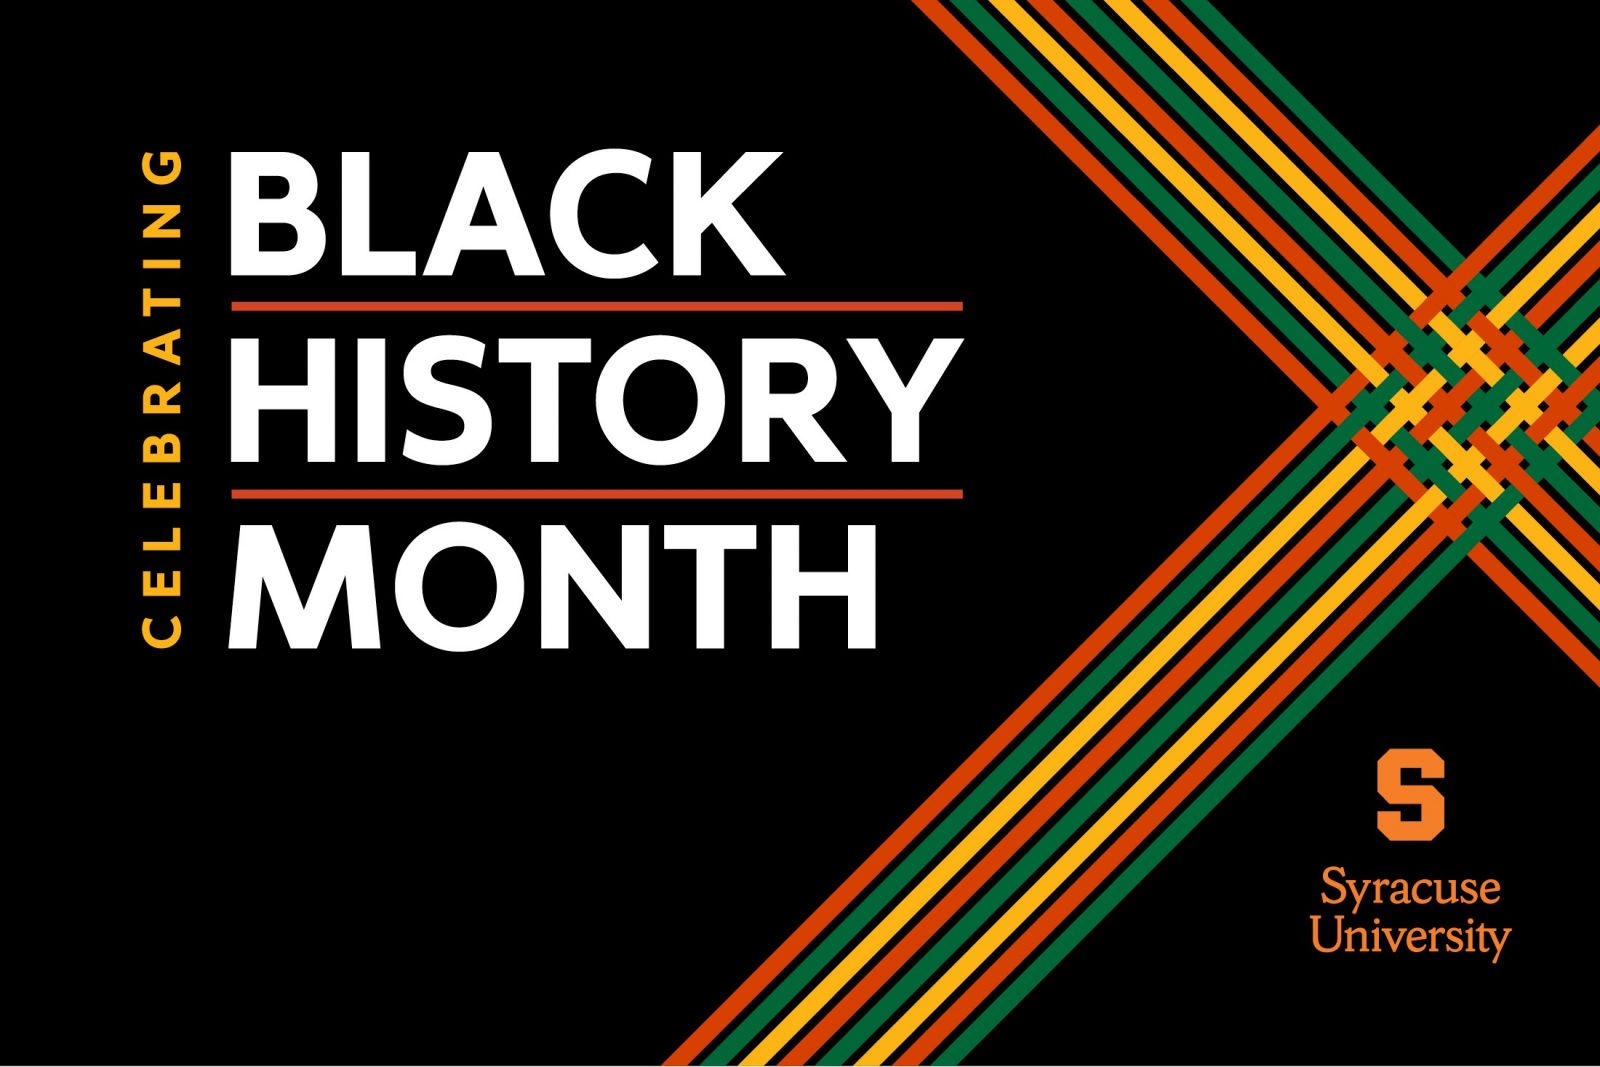 Text "Celebrating Black History Month" written on top of a black background, with a cross pattern of orange, yellow and green off to one side.